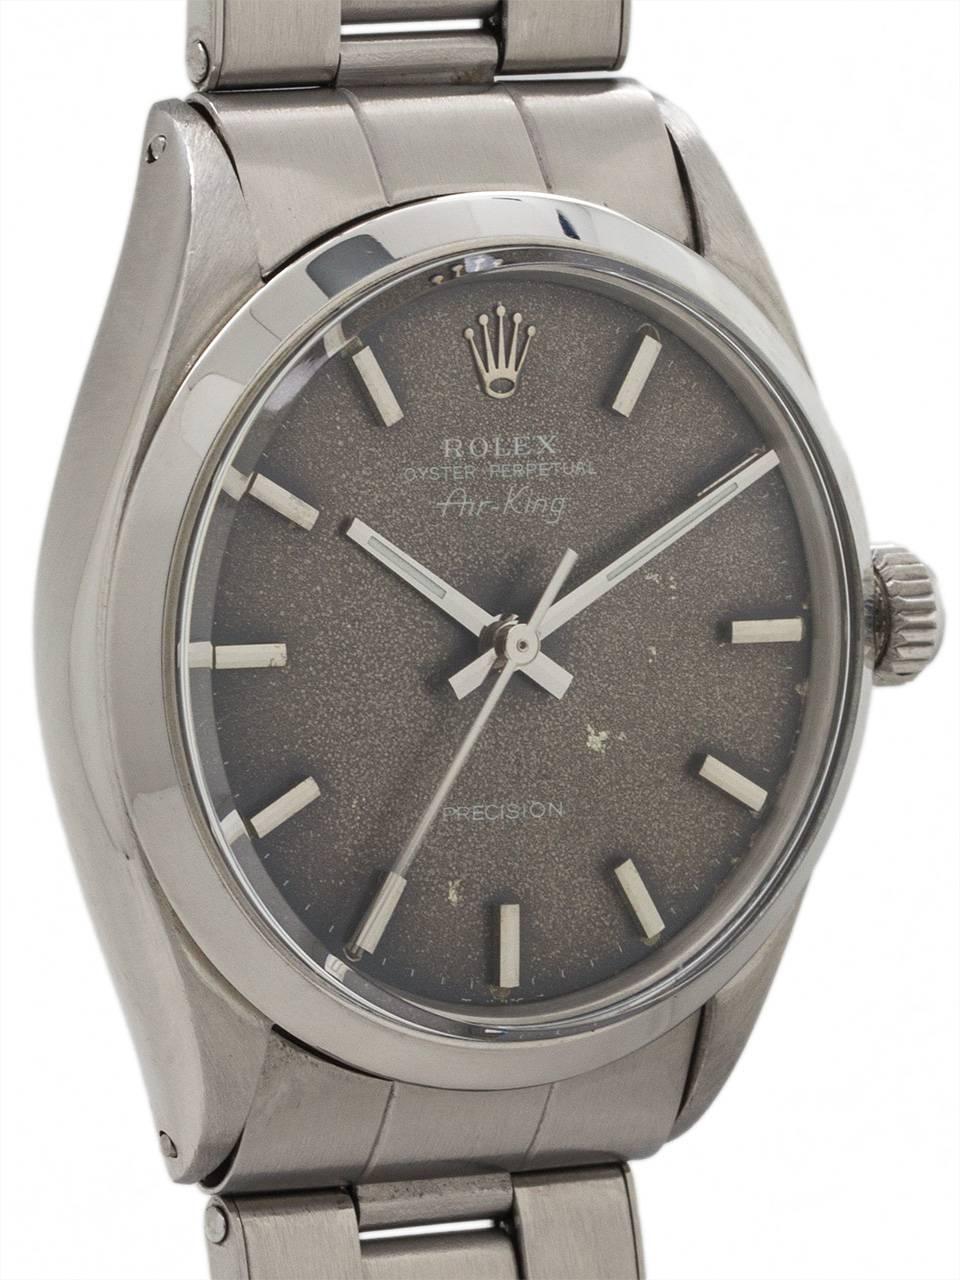 Modern Rolex Stainless Steel Oyster Perpetual Tropical Dial Airking Wristwatch